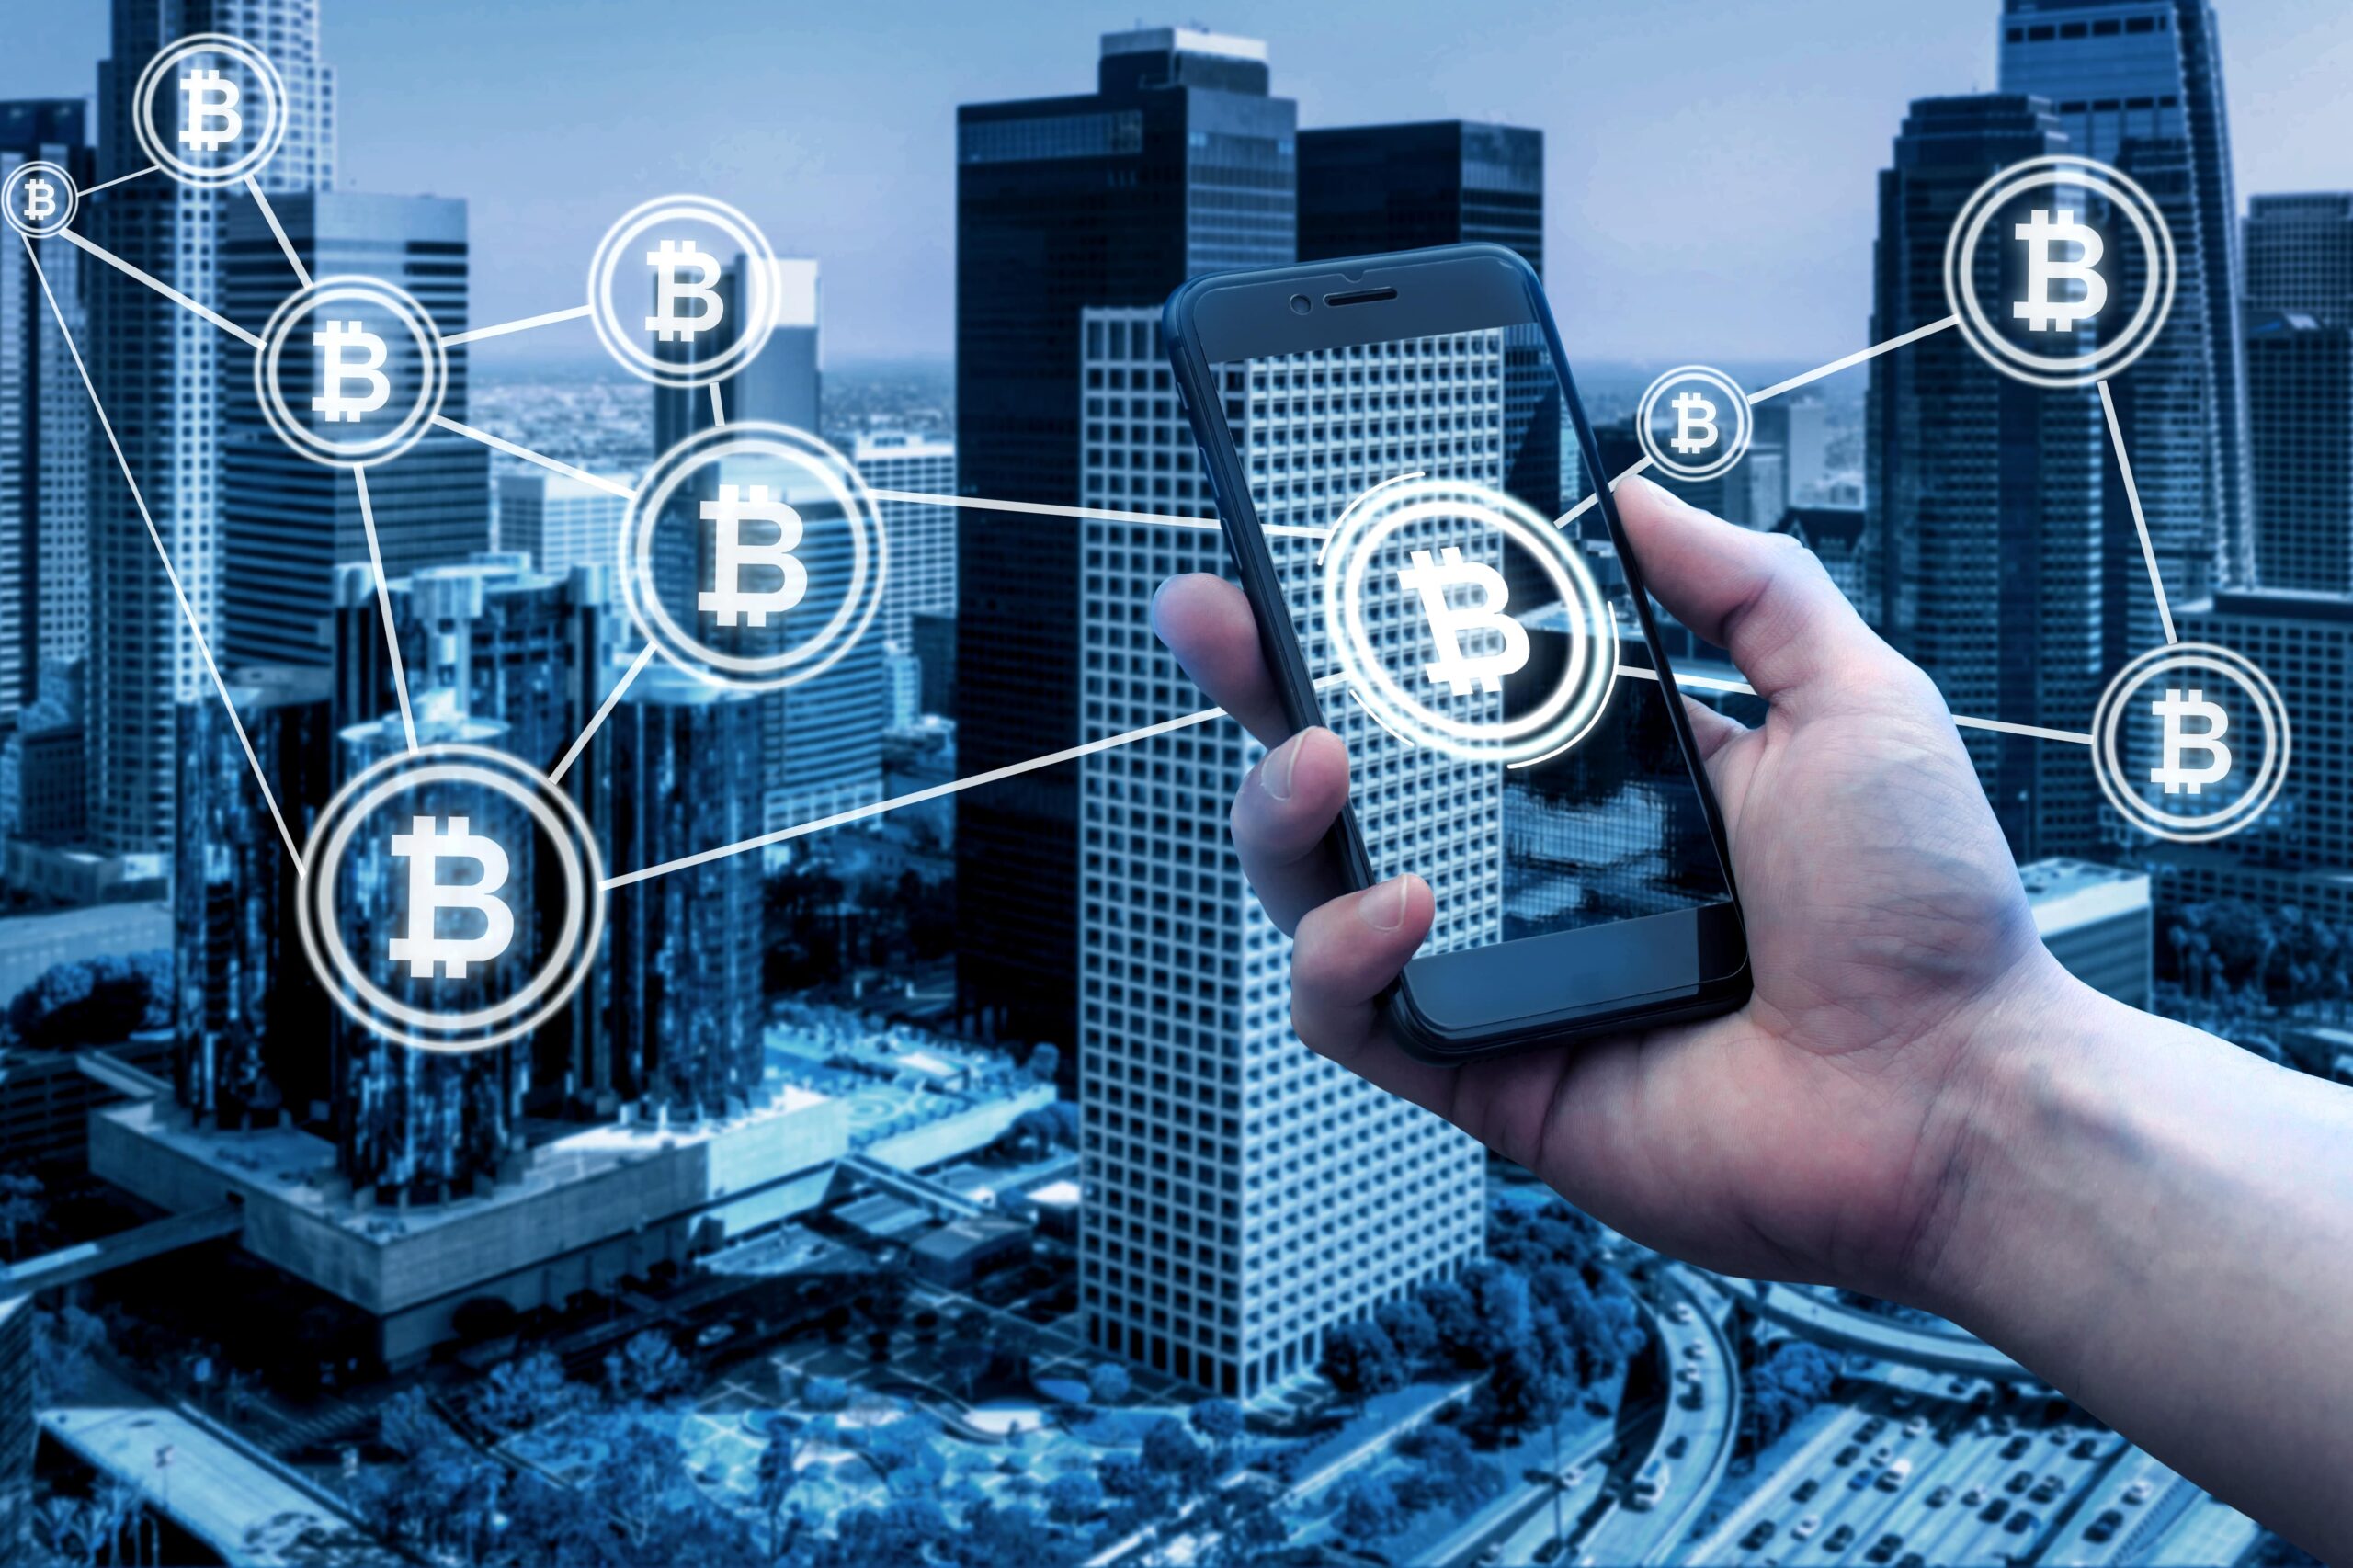 Take Real Estate to the next level with Blockchain!